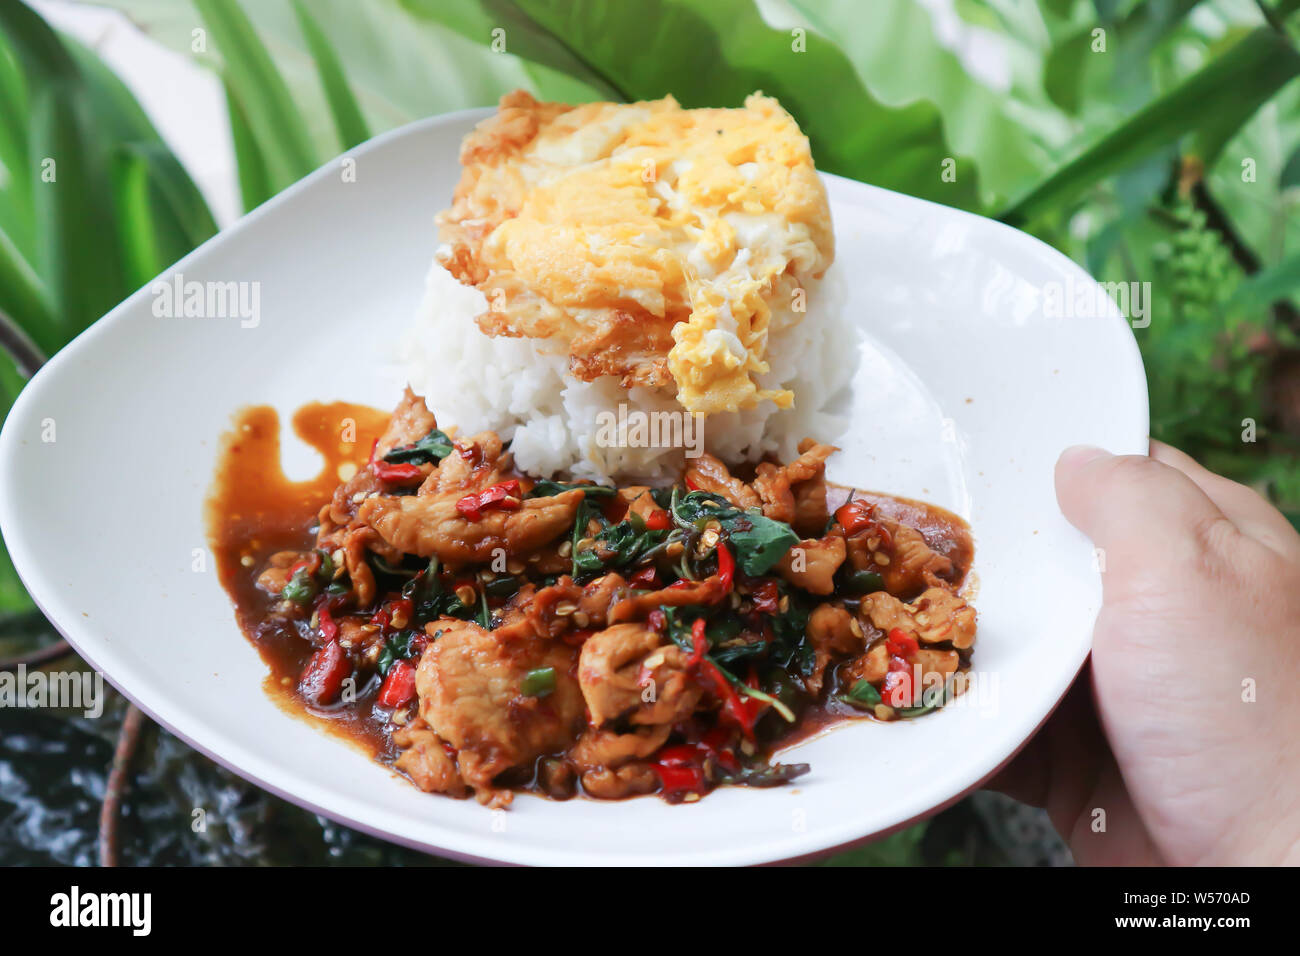 stir-fried pork with fried egg, holy basil and rice dish Stock Photo